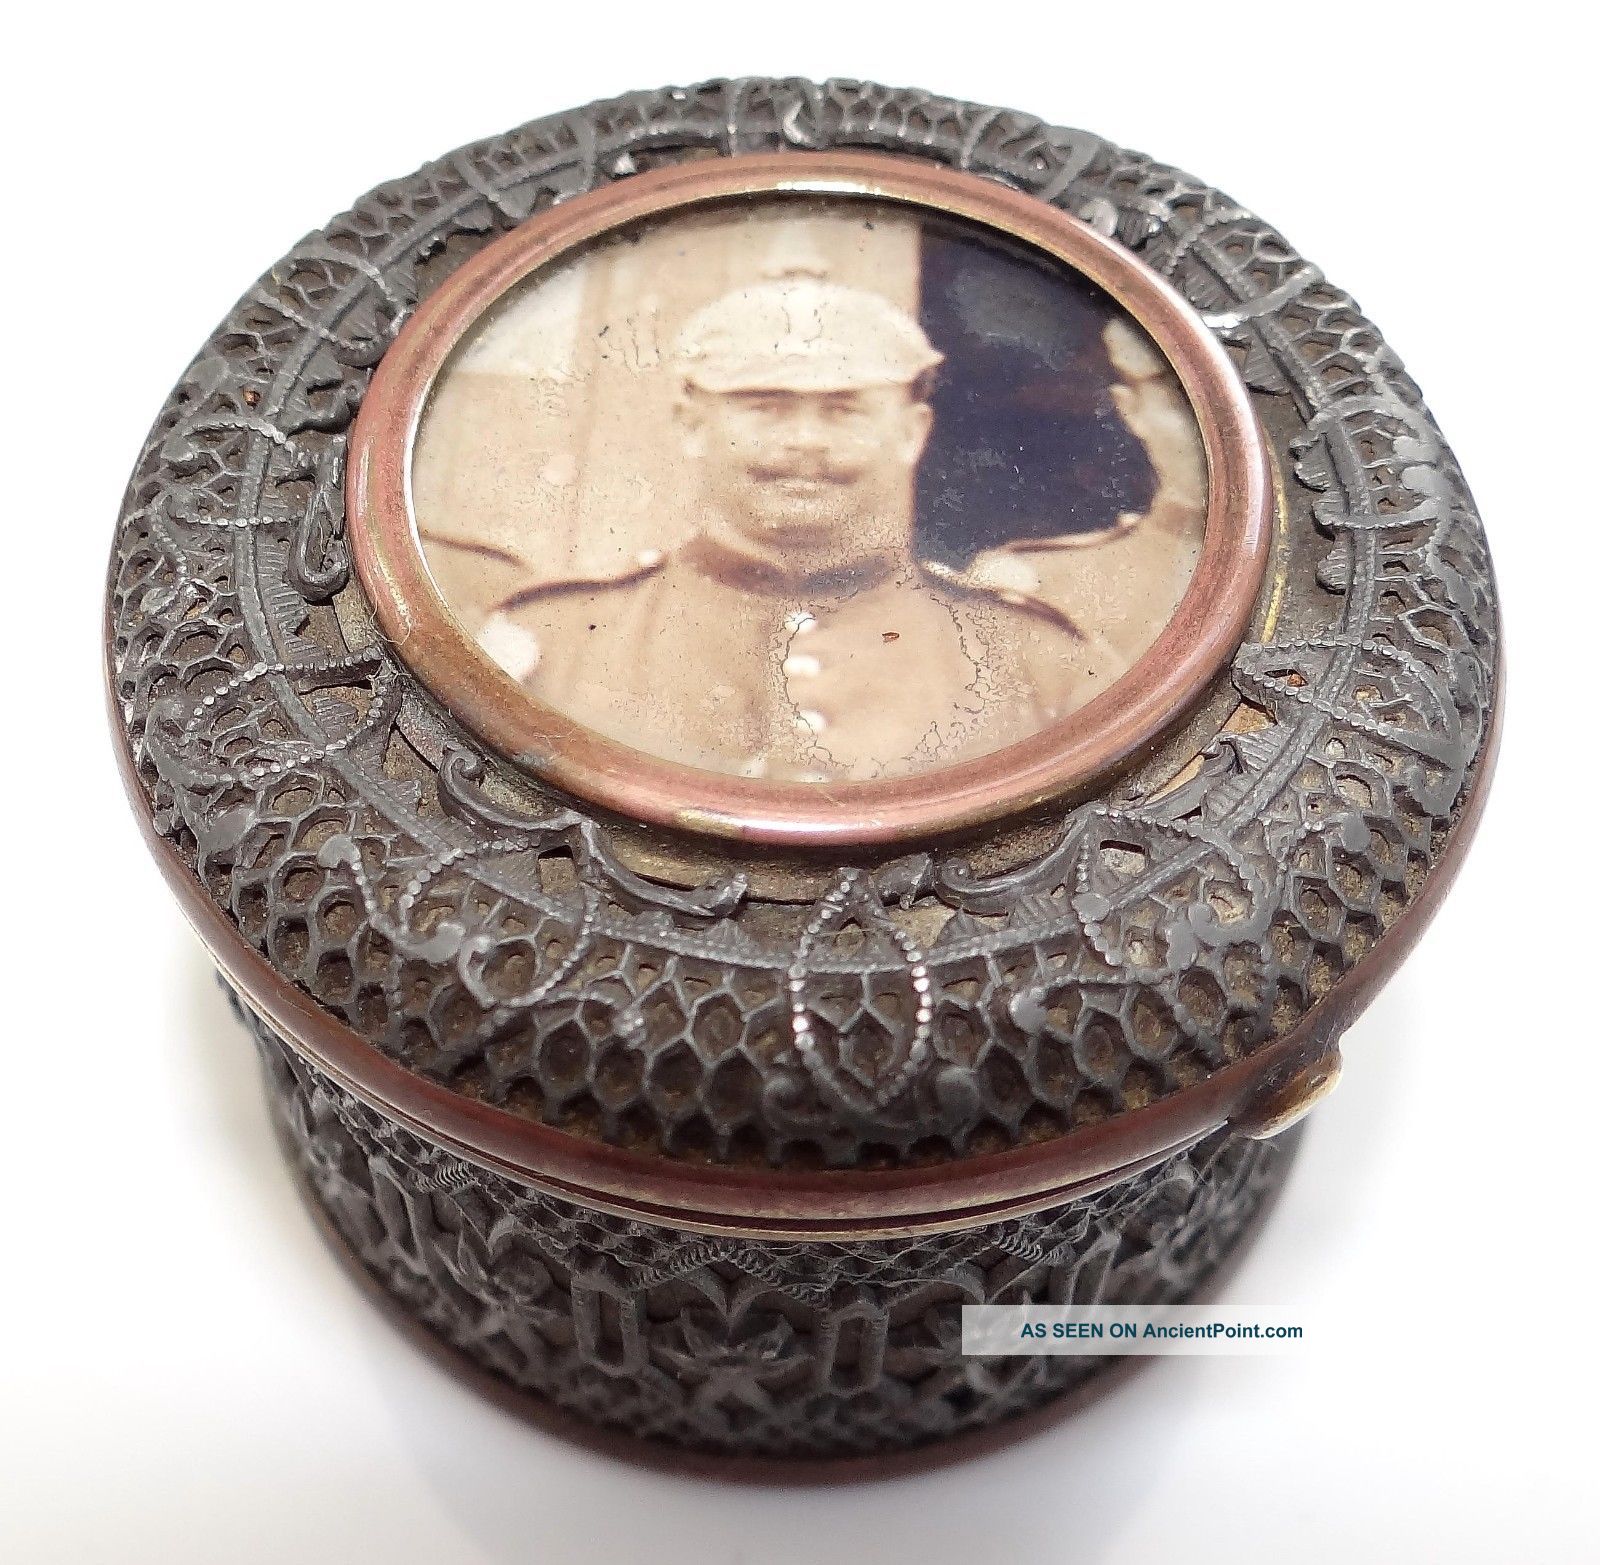 Antique 1910 German Wwi Copper & Metal Filagree Trinket Box With Soldiers Photo European photo